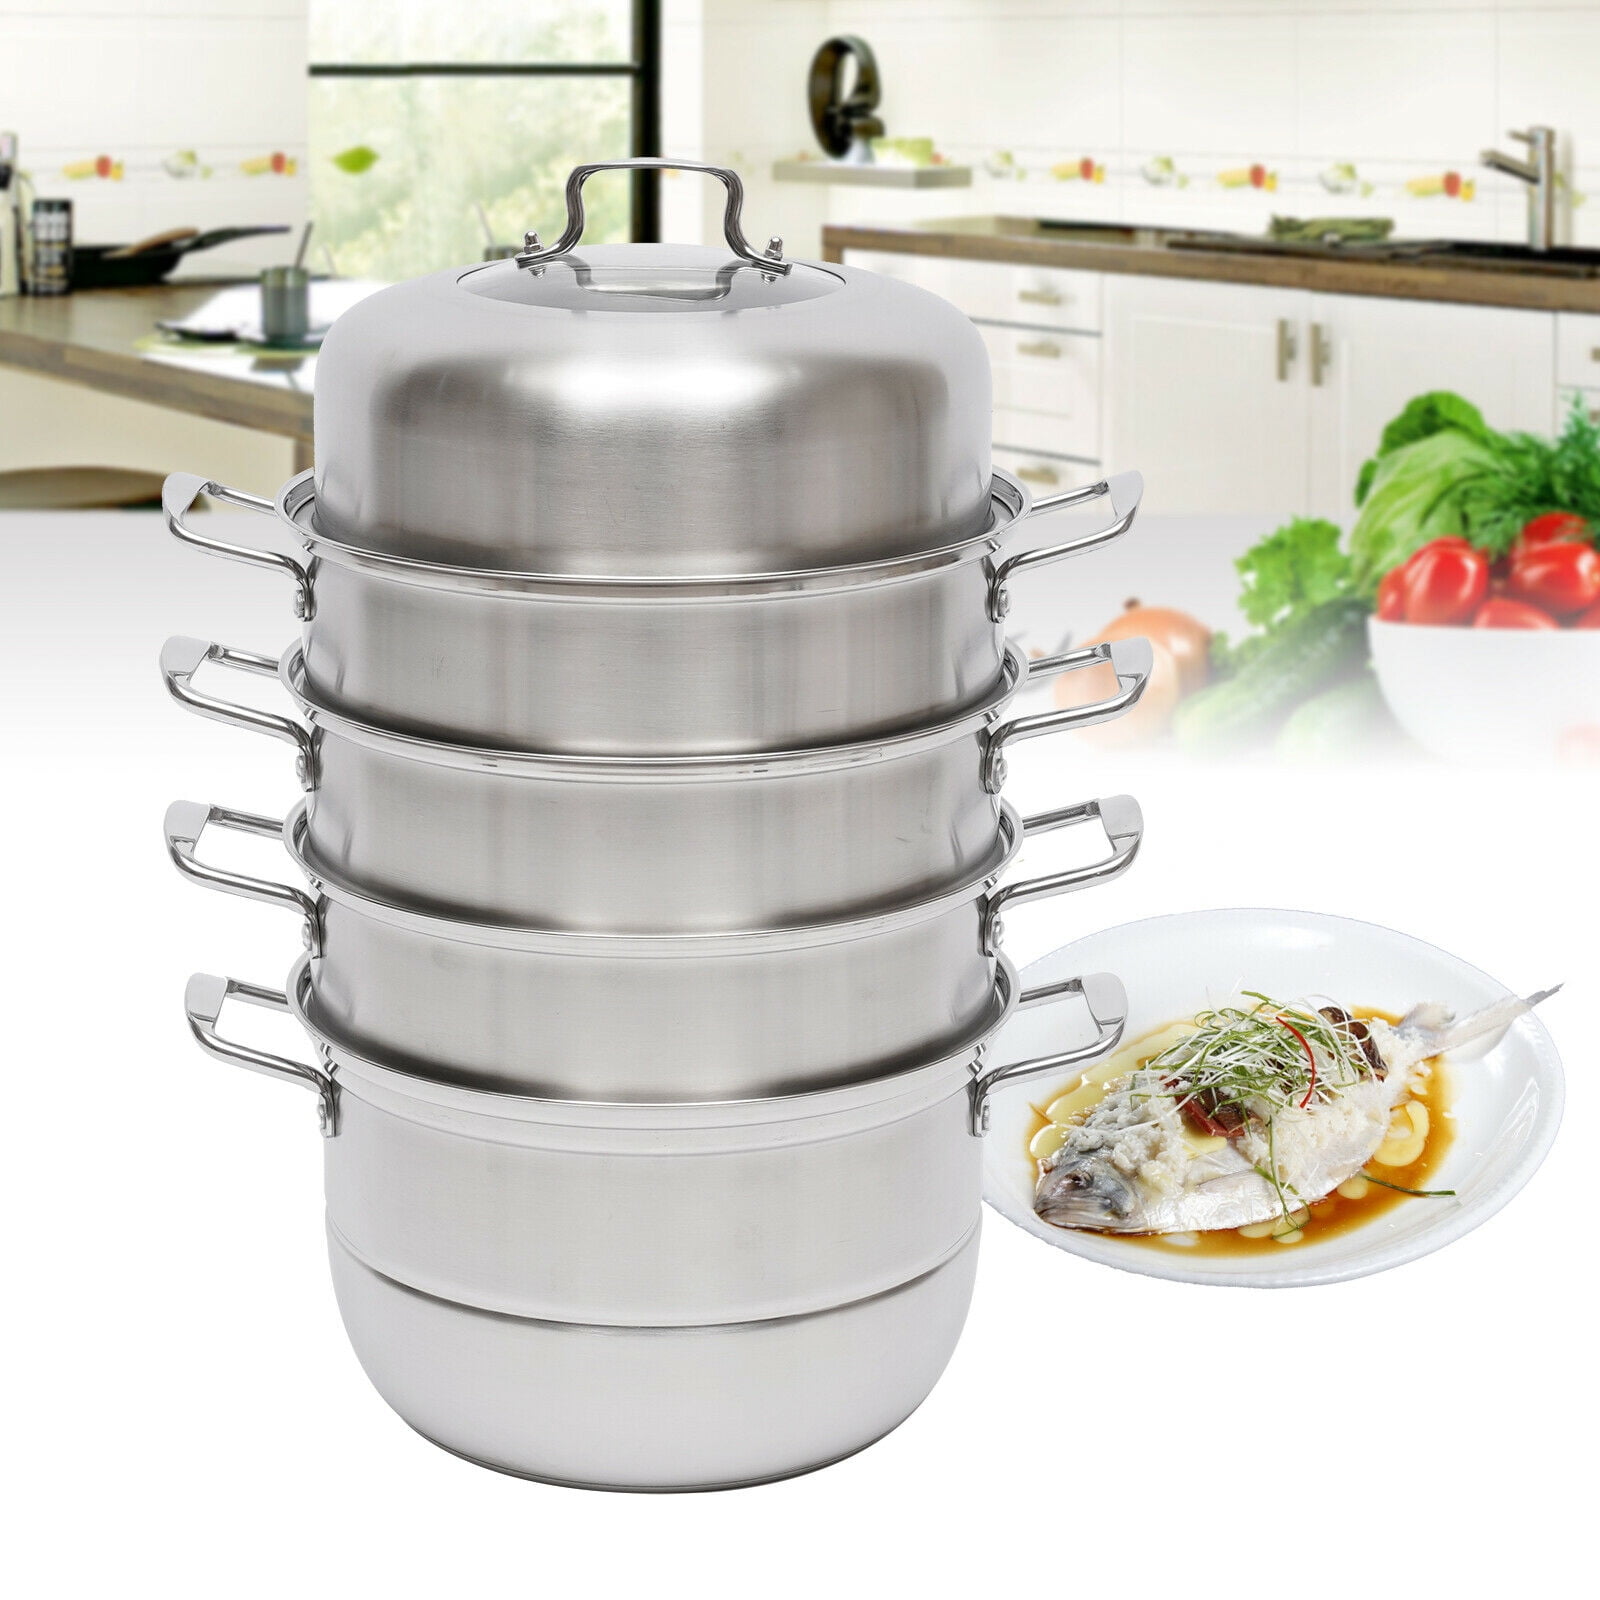 VEVOR Stainless Steel Dumpling Steamer 5-Titer Electric Grill Stove  Dia-11.8 in. for Cook Soup, Noodles, Fishes Work with Gas  ZL5CBXGZL30CM0001V0 - The Home Depot